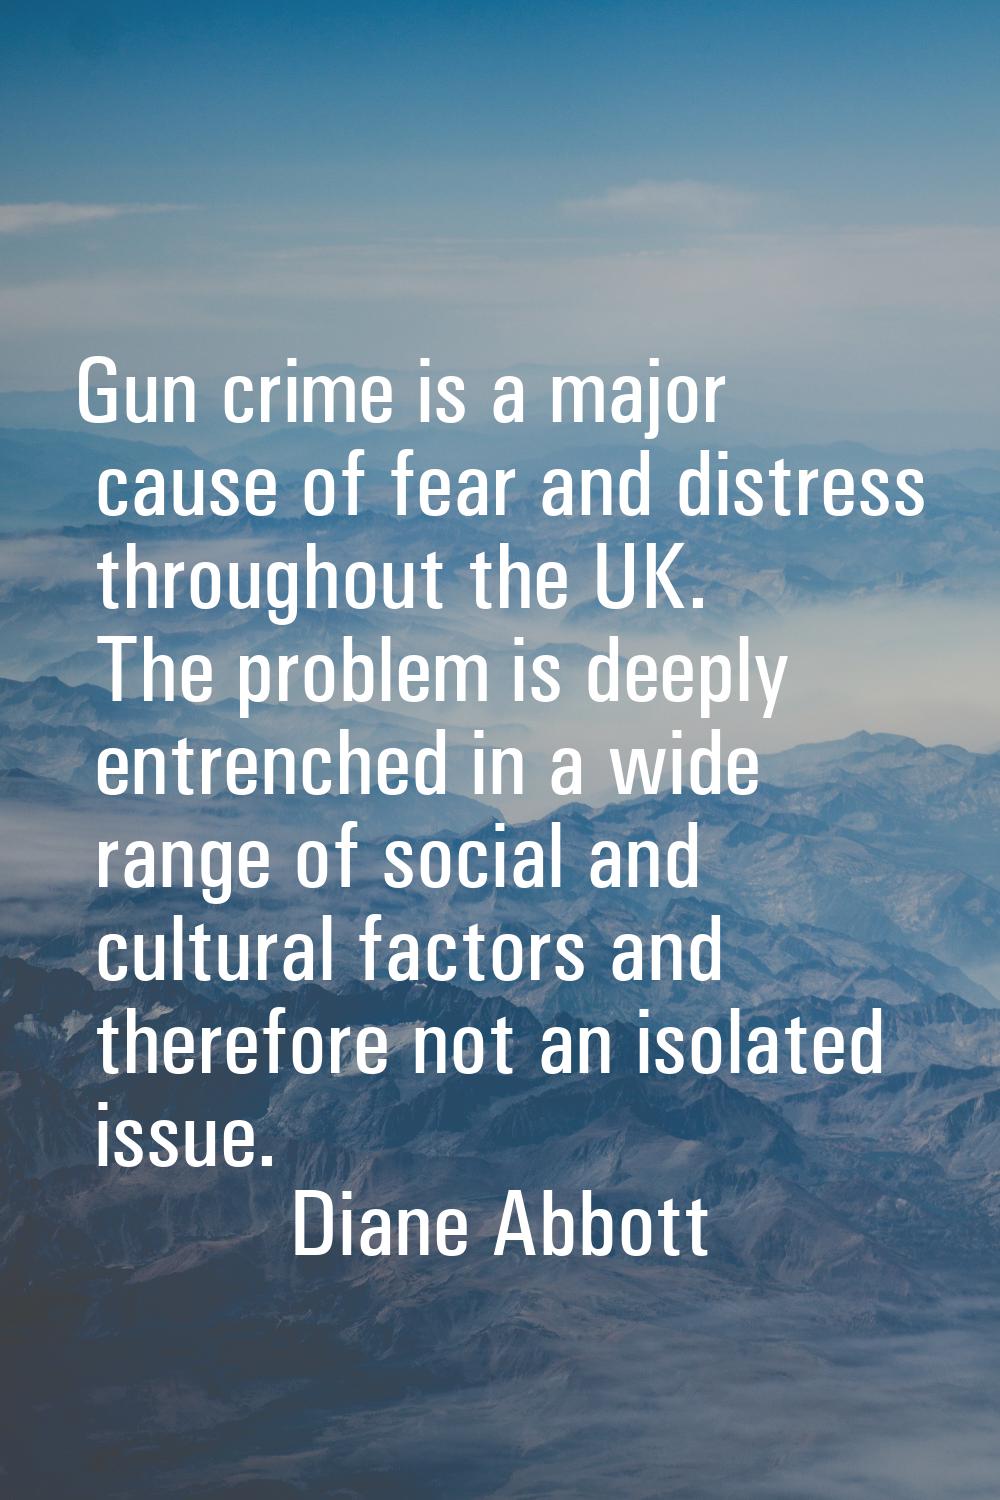 Gun crime is a major cause of fear and distress throughout the UK. The problem is deeply entrenched